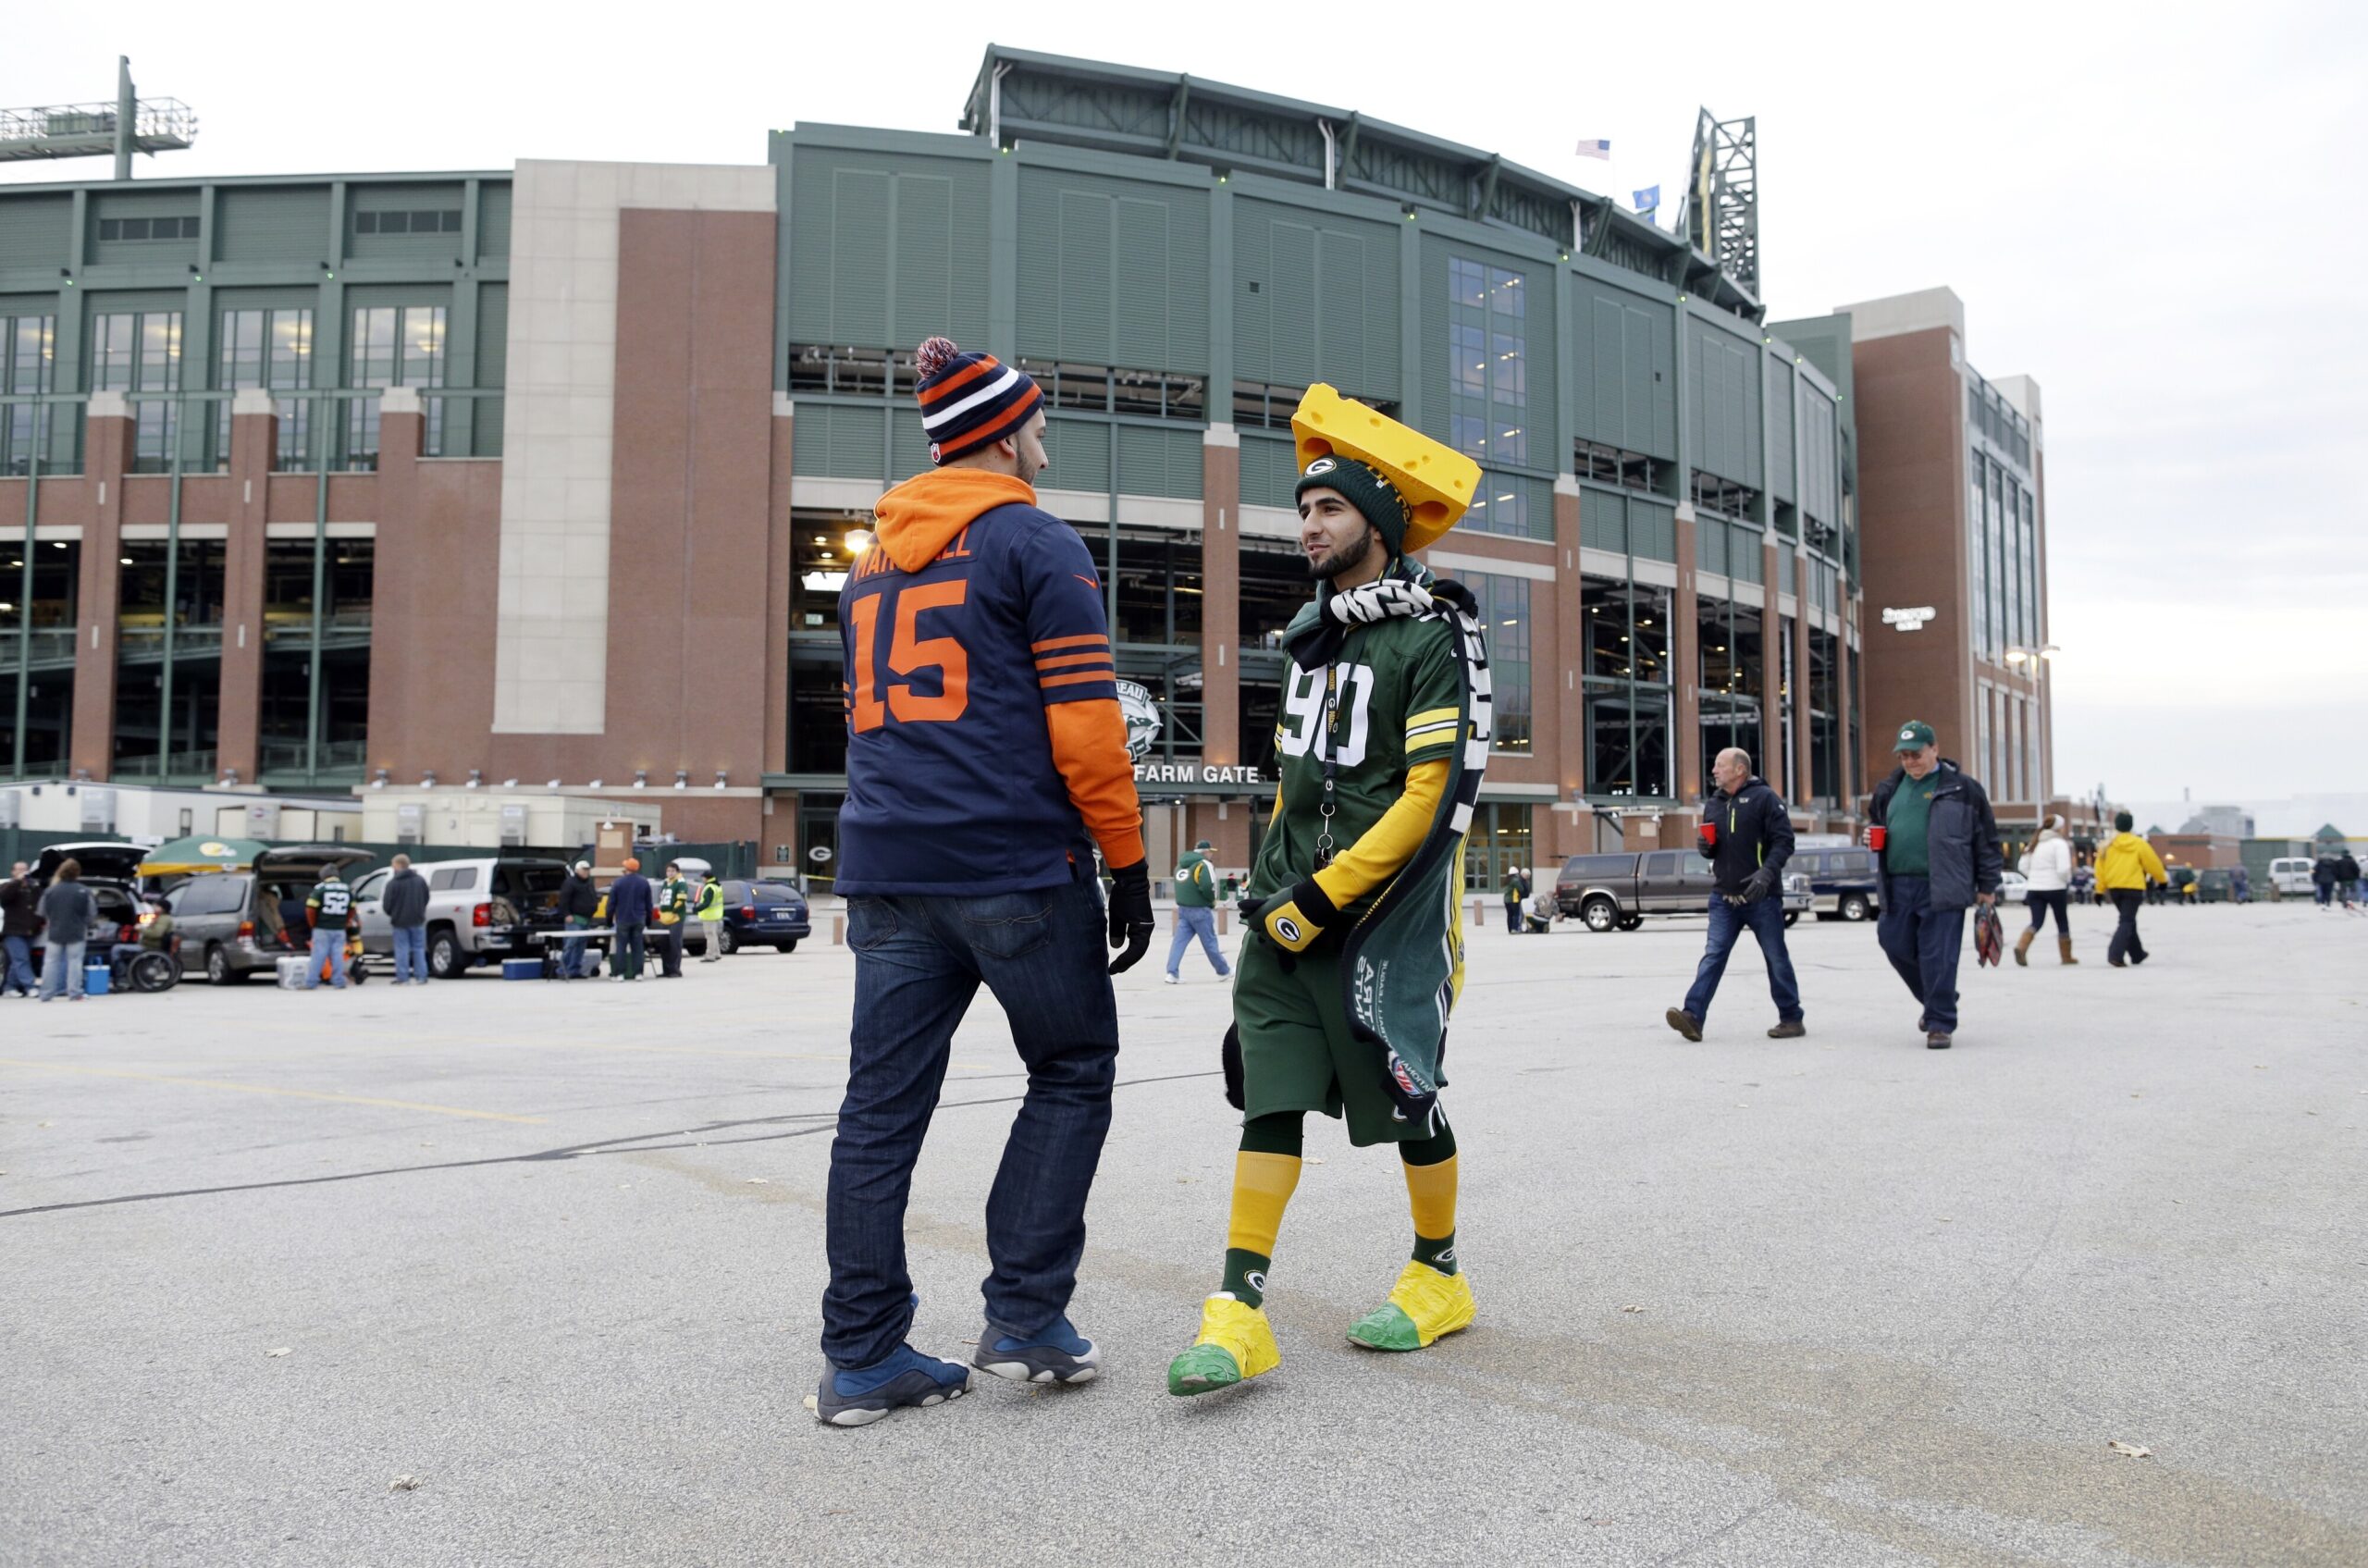 Fans make their way to Lambeau Field before NFL football game between the Green Bay Packers and the Chicago Bears Monday, Nov. 4, 2013